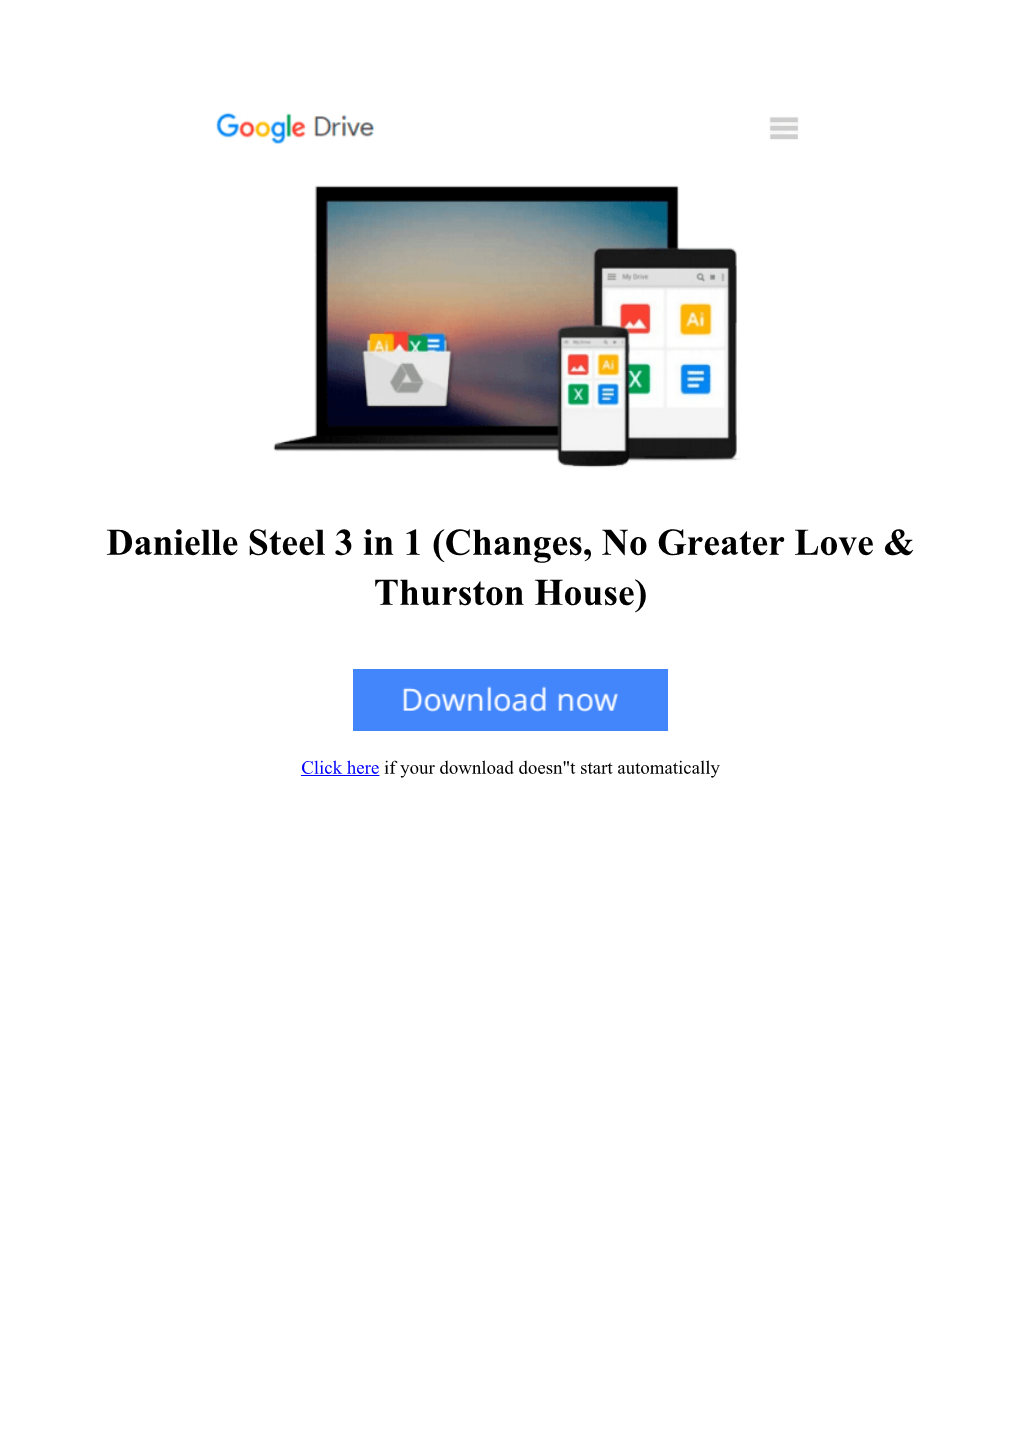 [CRJ7]⋙ Danielle Steel 3 in 1 (Changes, No Greater Love